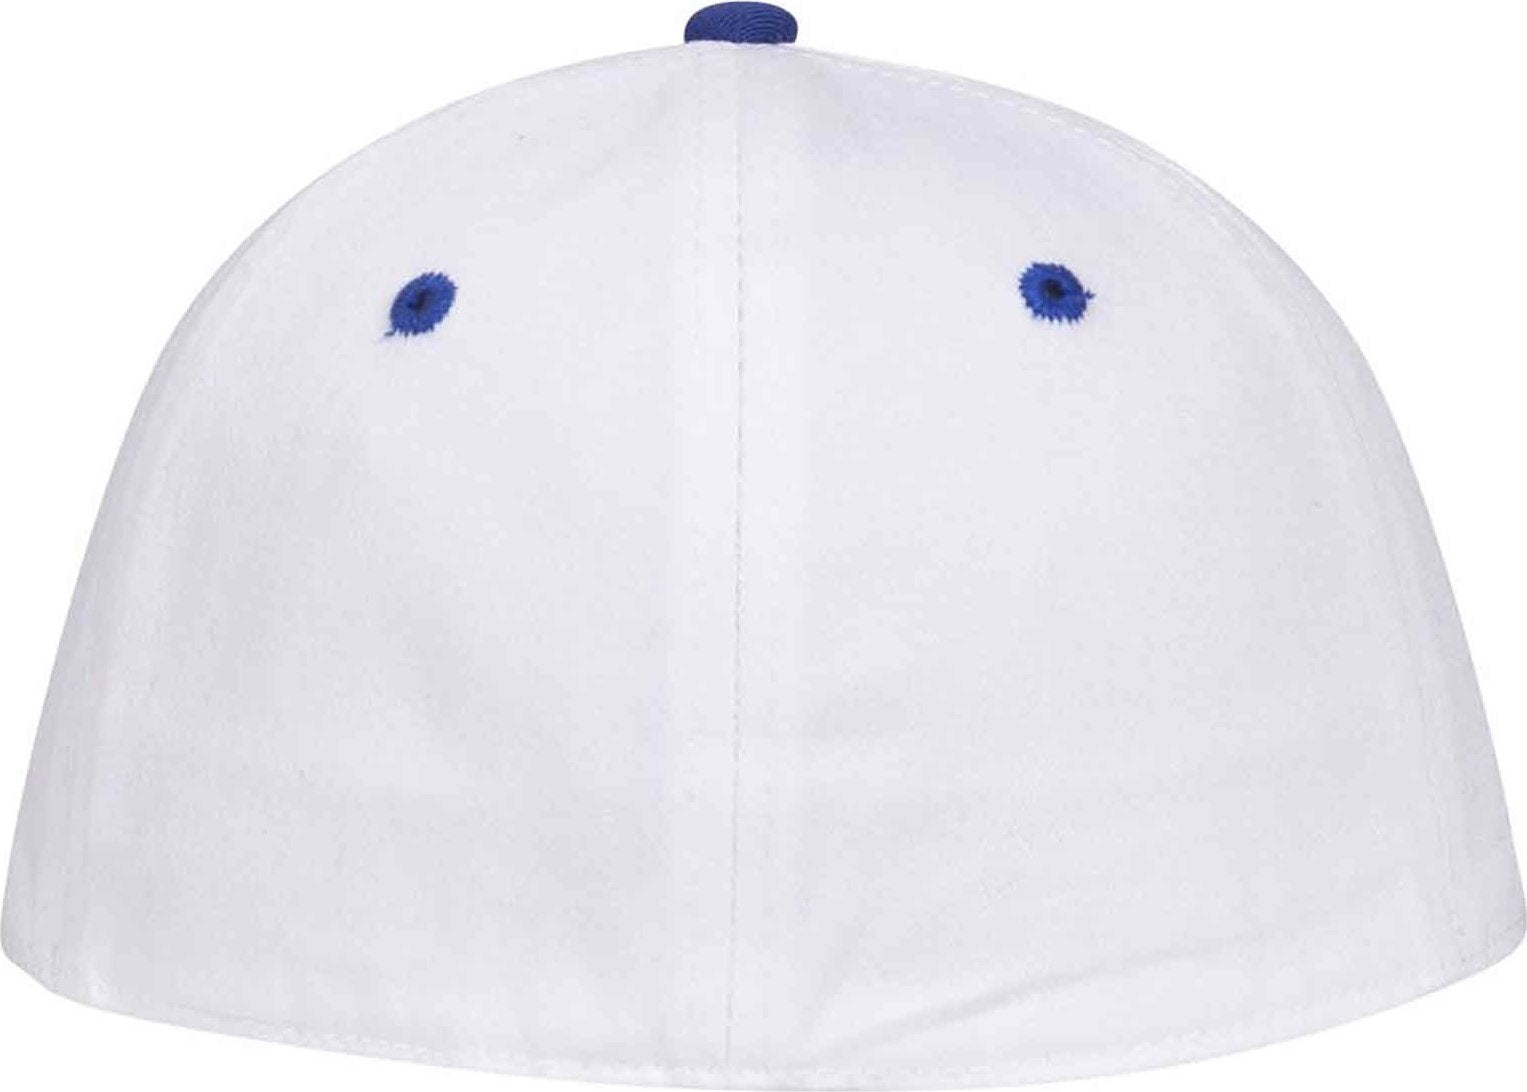 OTTO 12-267 Stretchable Deluxe Brushed Cotton Twill Sandwich Visor Low Profile Pro Style Cap S/M - Royal White White - HIT a Double - 1